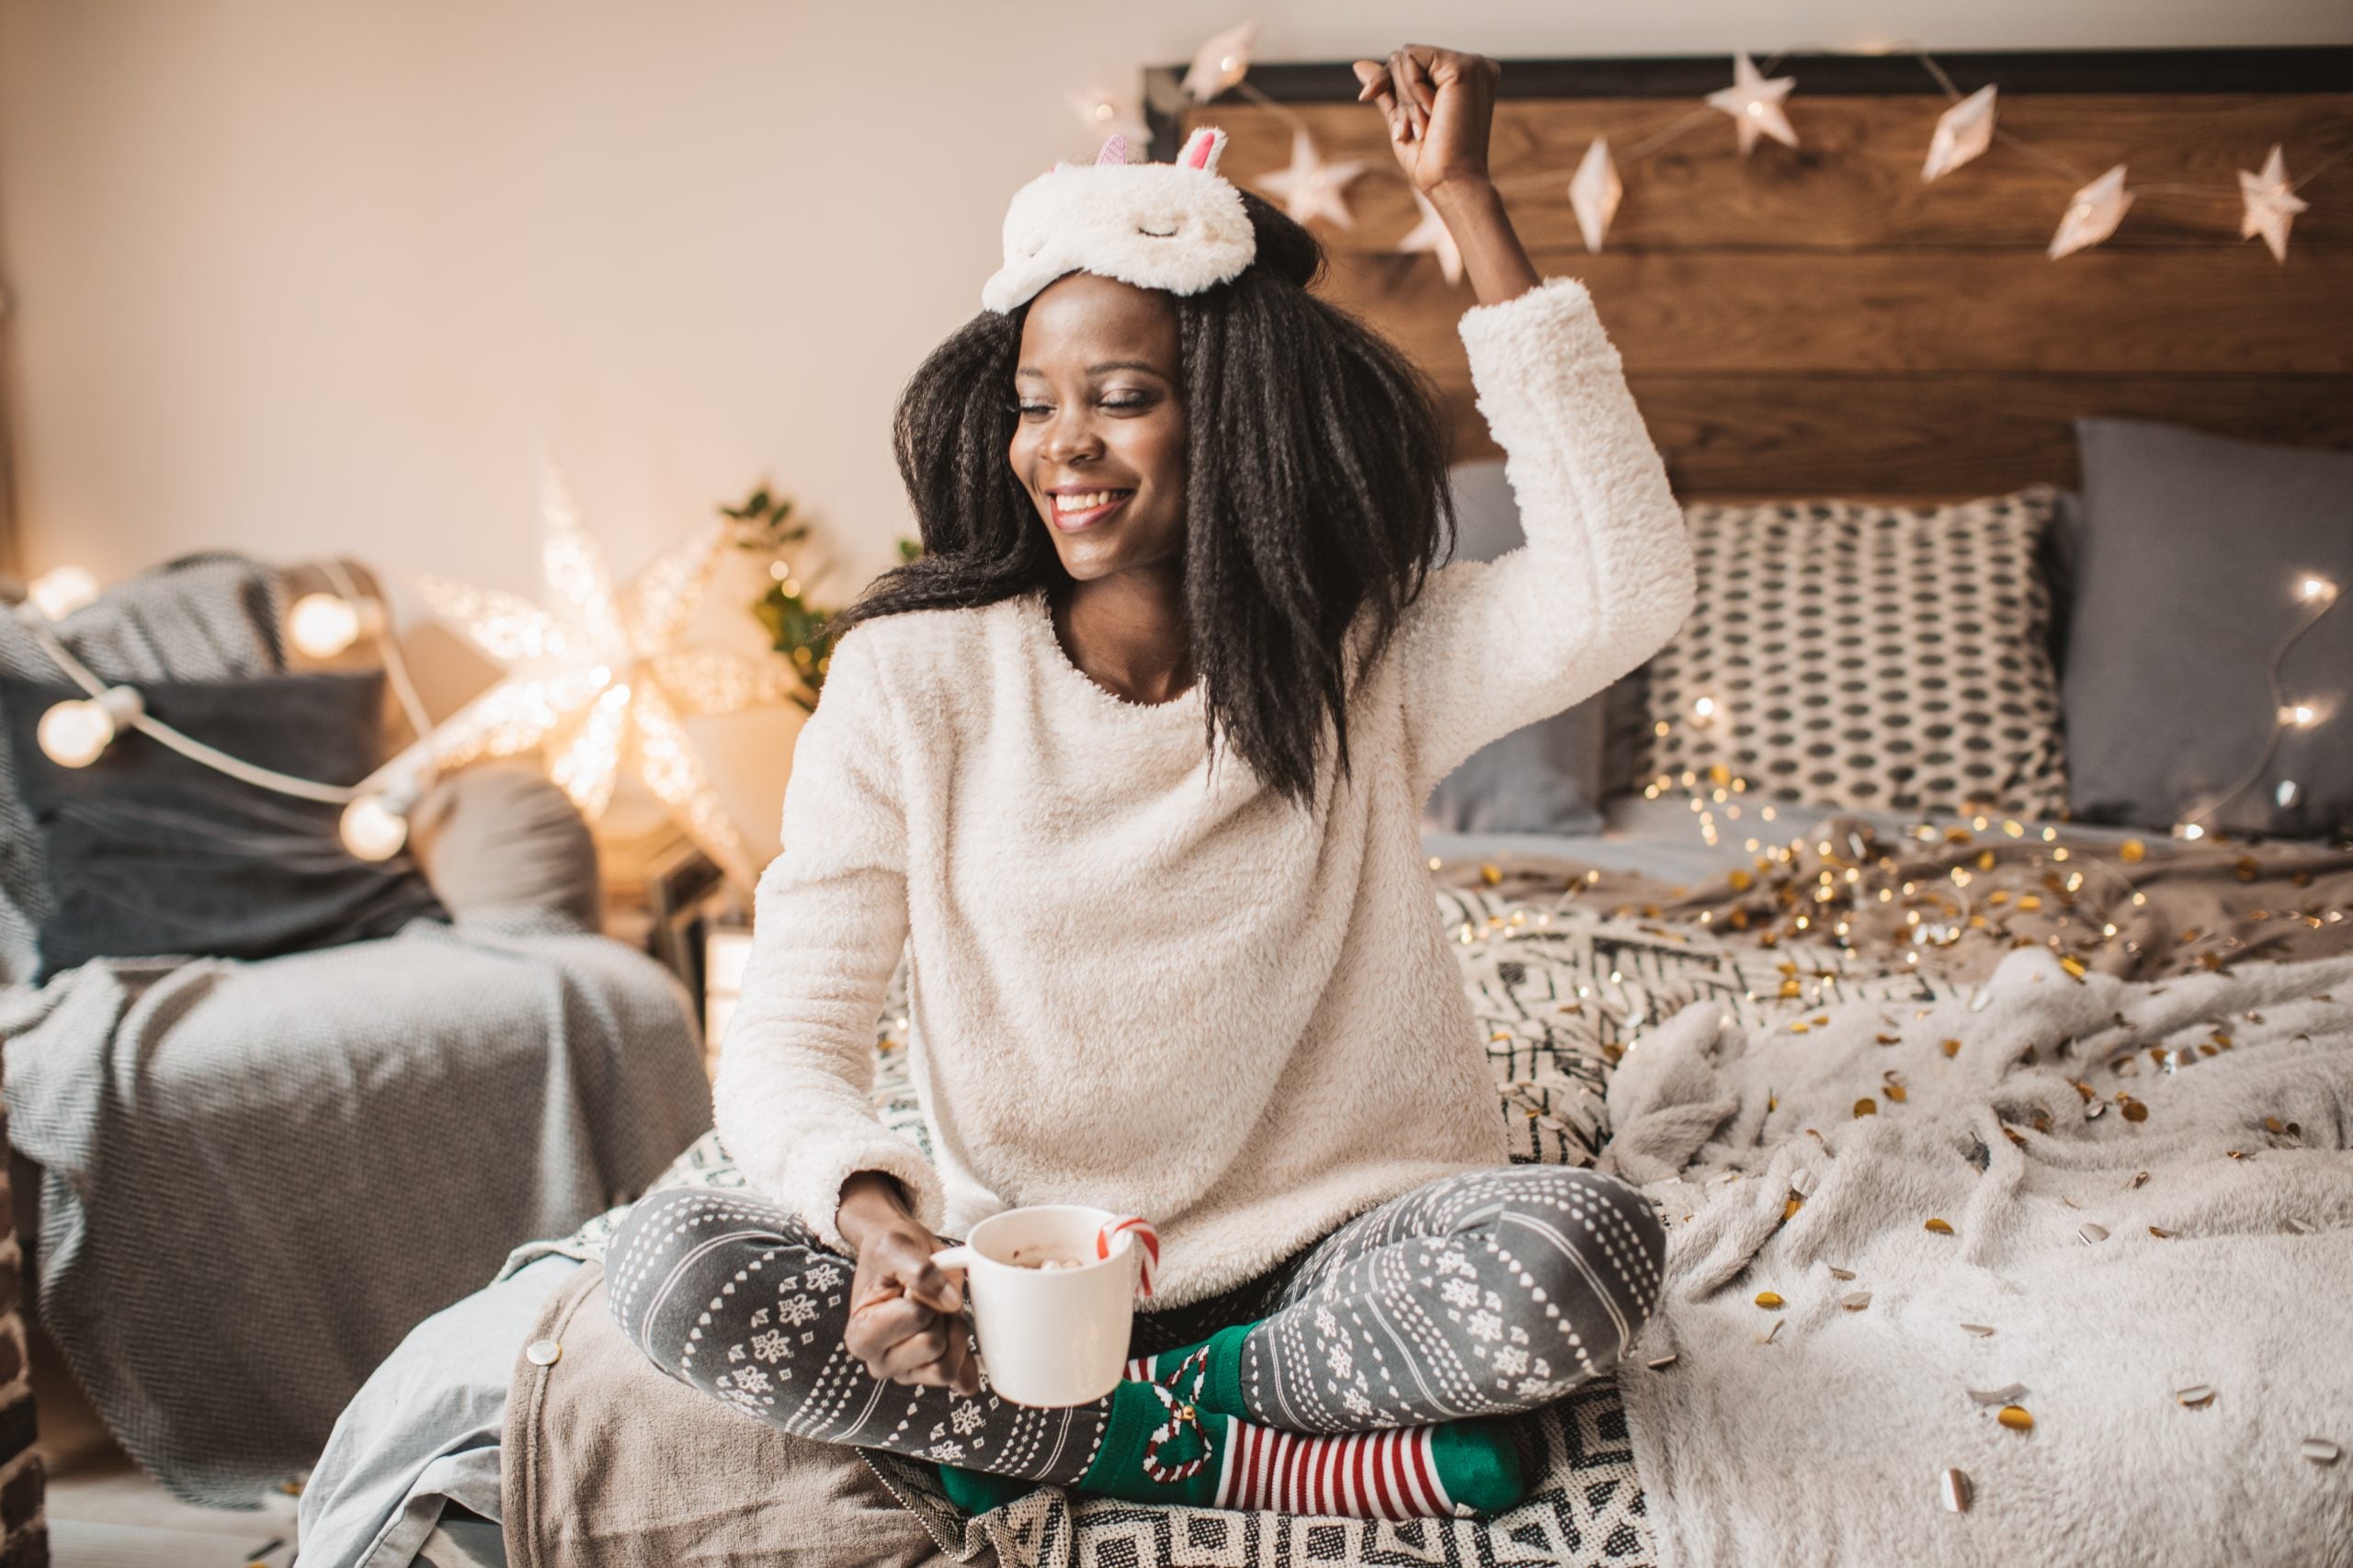 6 Ways To Make Your Home Cozier For The Holiday Season